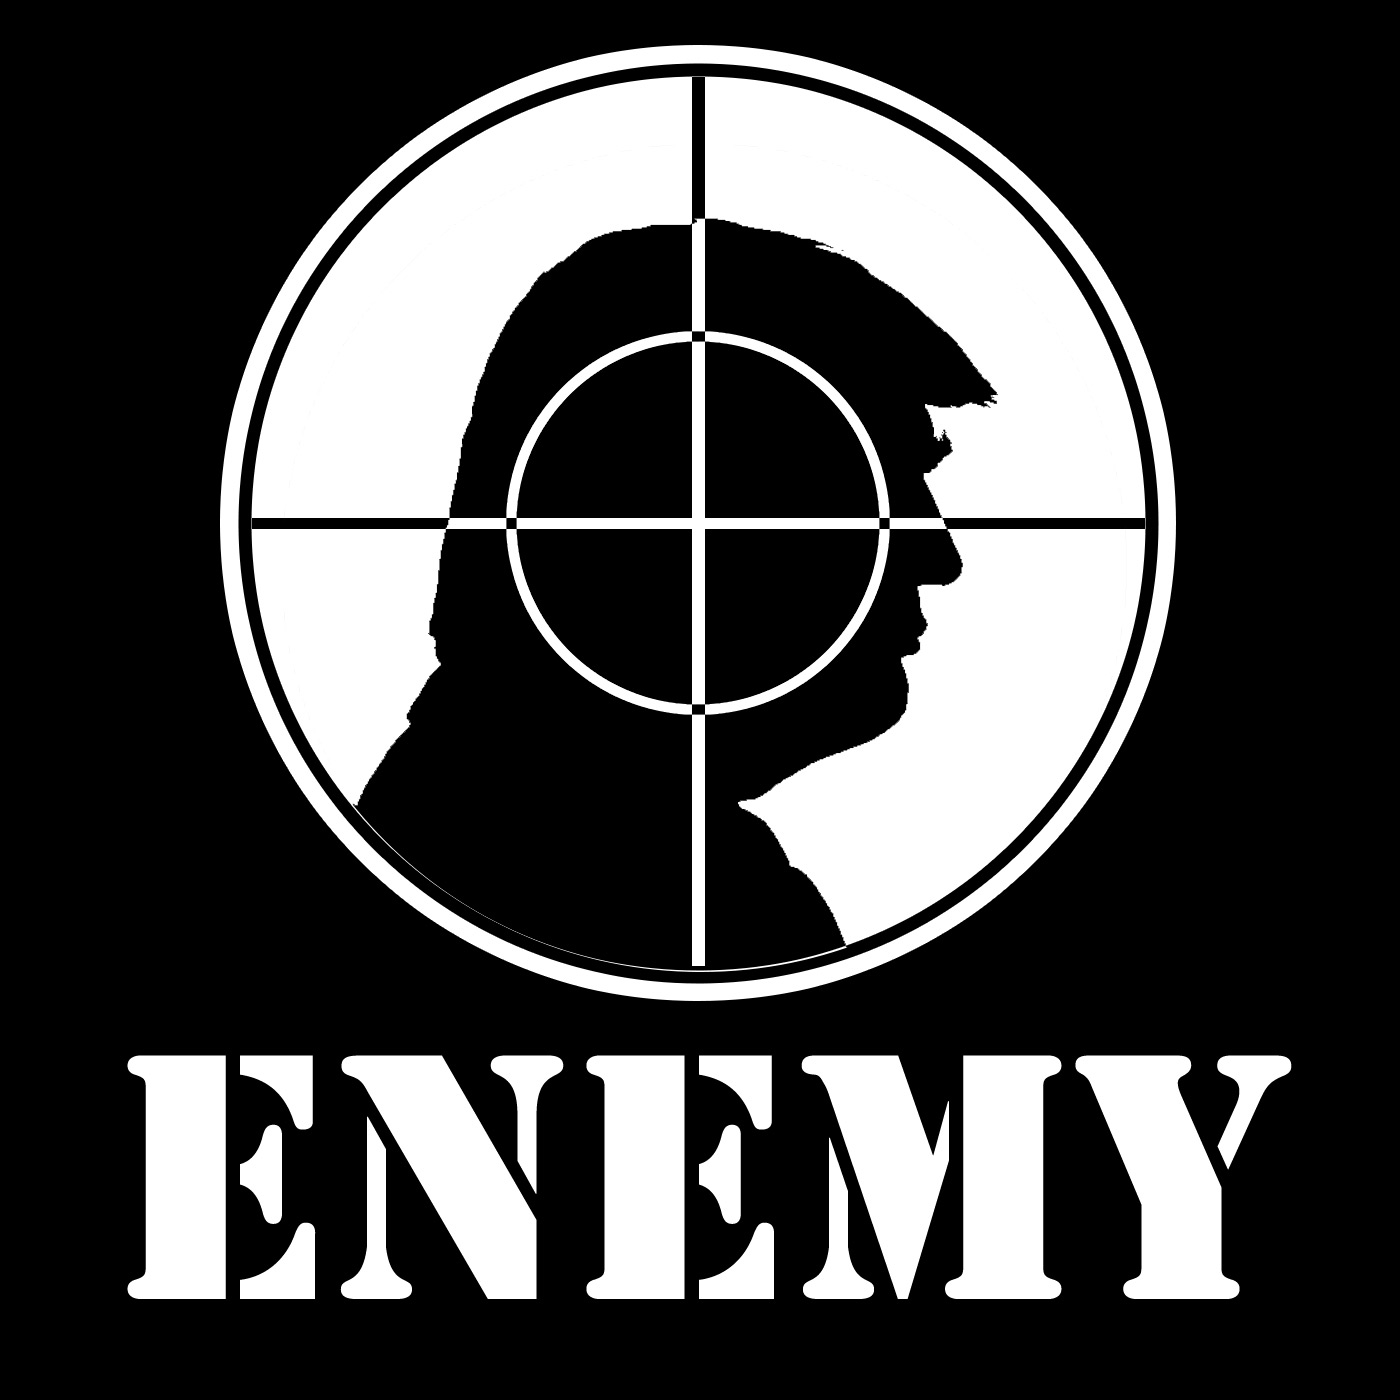 trump enemy - Radio Clash Podcast Up Against The Wall - Psych Mix Part 2 Radio Clash Music Mashup Podcast brings you the best in eclectic tunes, mashups and remixes from around the world. Since 2004, we've been bringing you the freshest and most innovative music from a diverse range of genres and cultures. Join us on our musical journey as we explore the sounds of yesterday, today, and tomorrow. Discover new music and be inspired by the mashup of musical styles that only Radio Clash can provide. Subscribe now to elevate your musical experience!